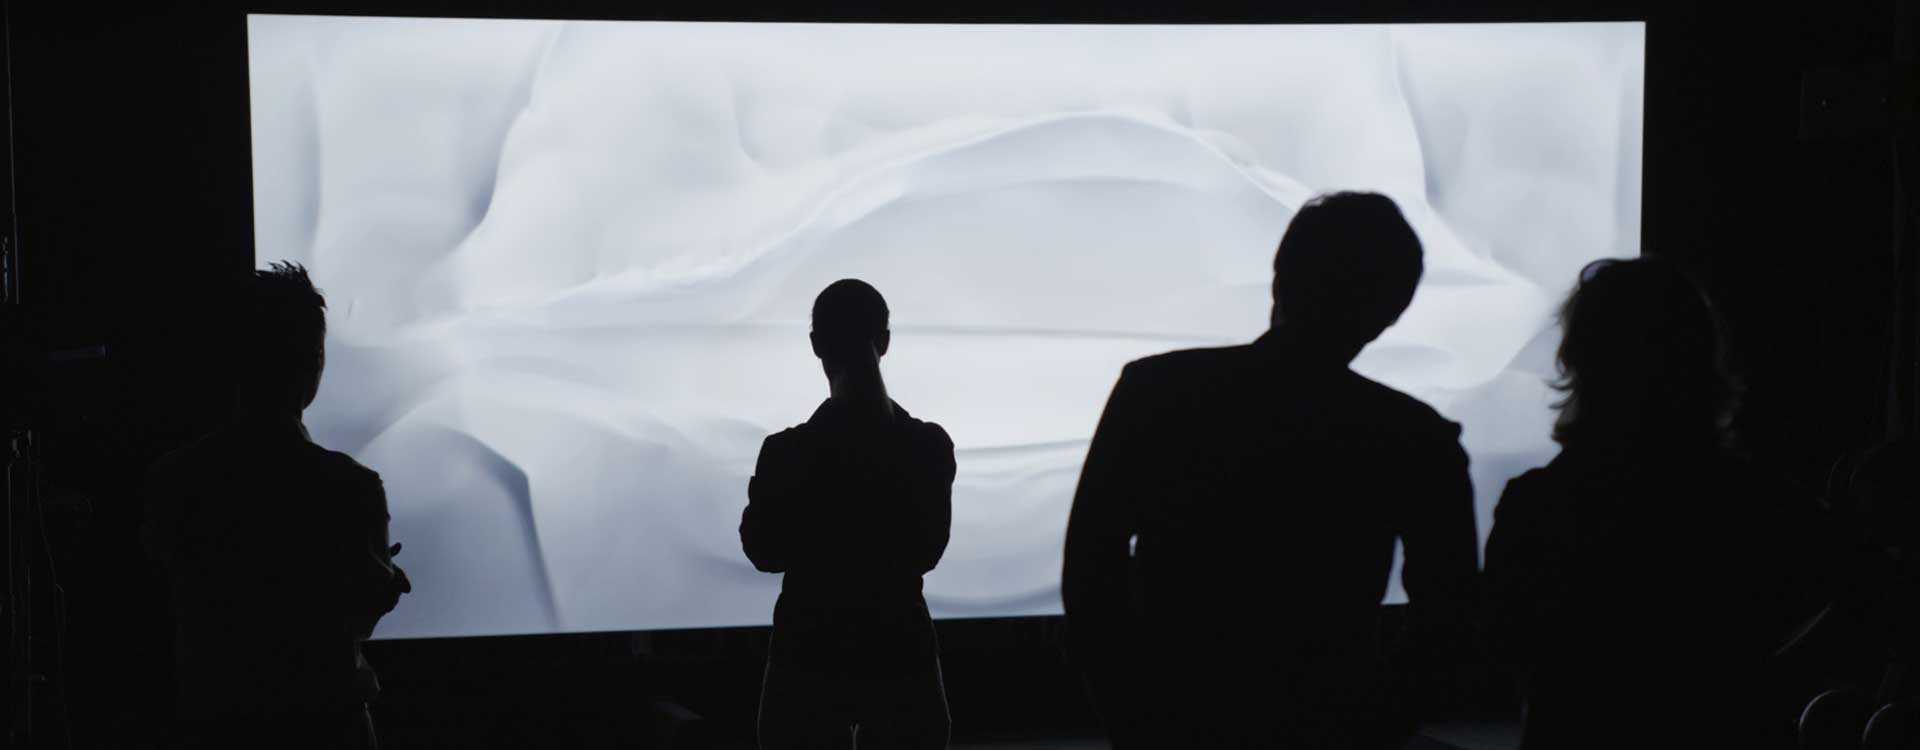 Audience in front of display. Still from Mercedes-Benz Commercial.